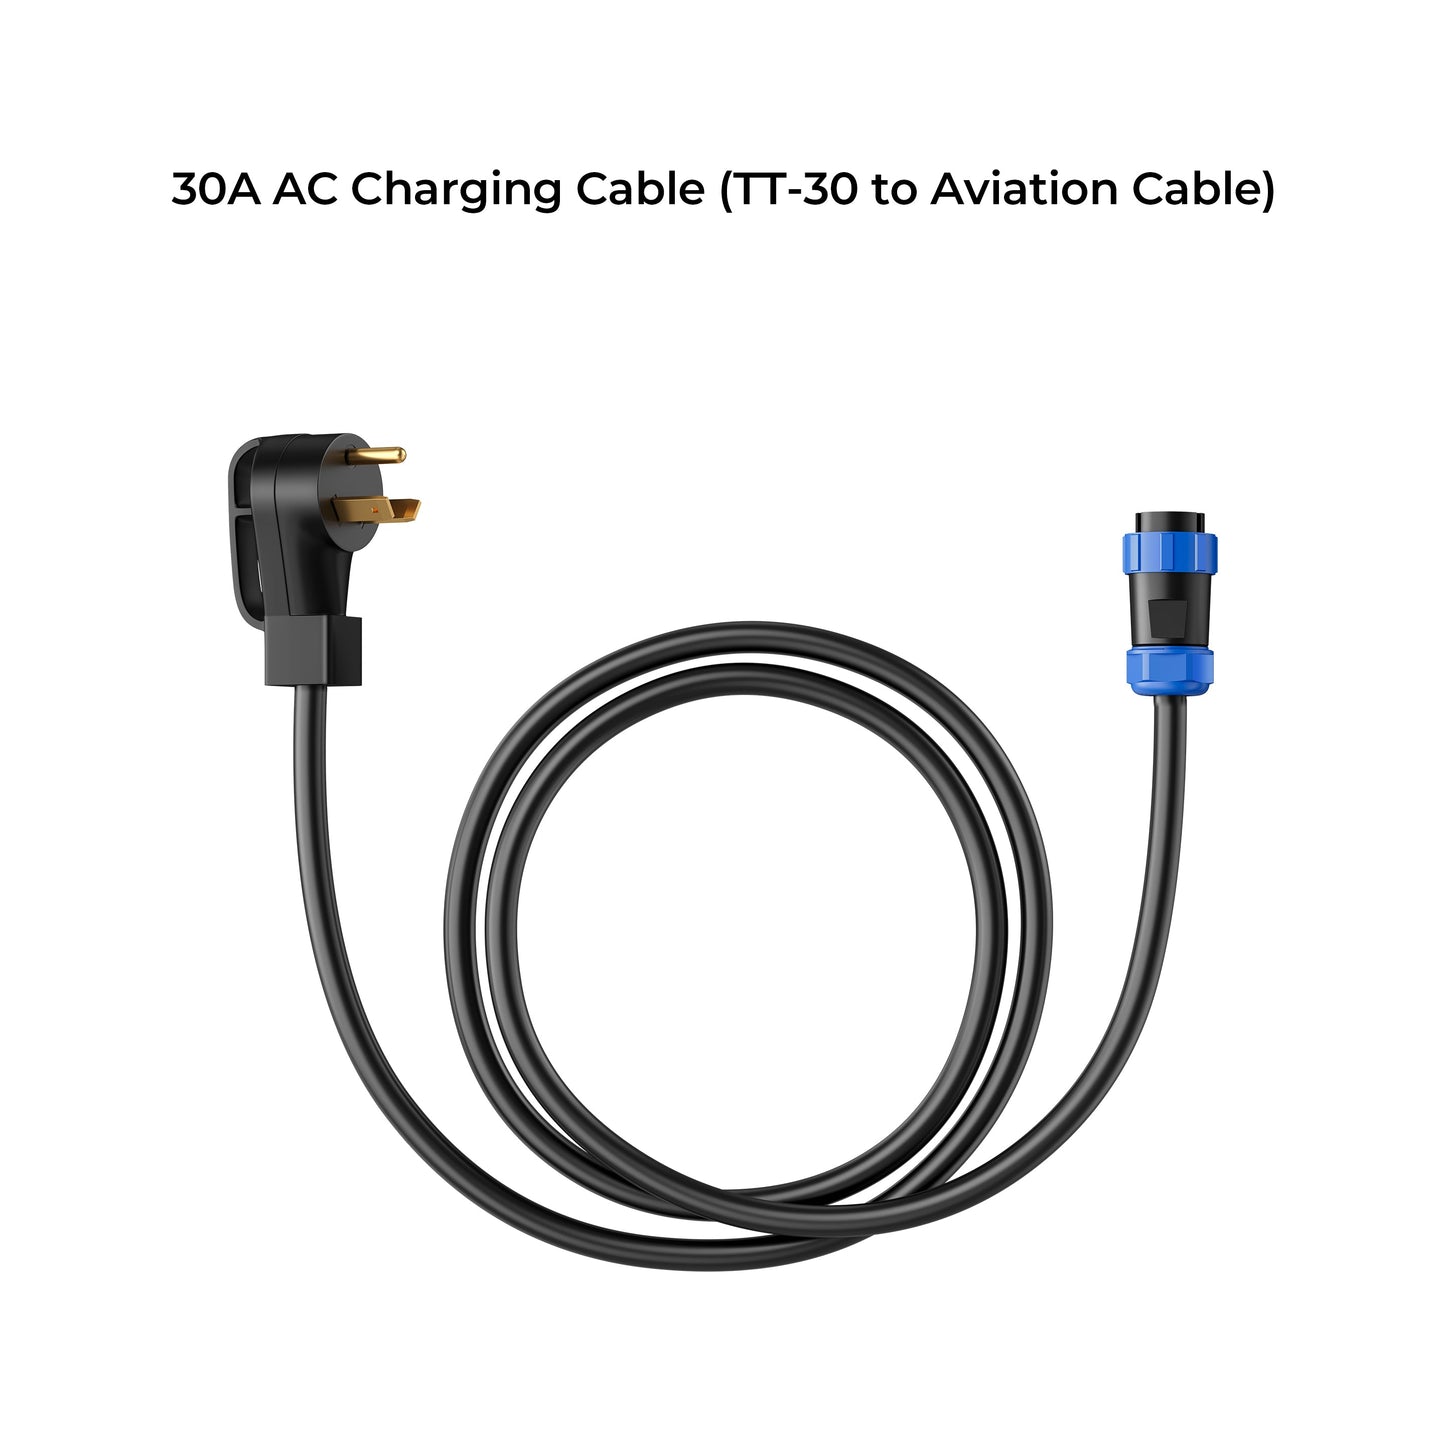 AC CHARGING CABLE